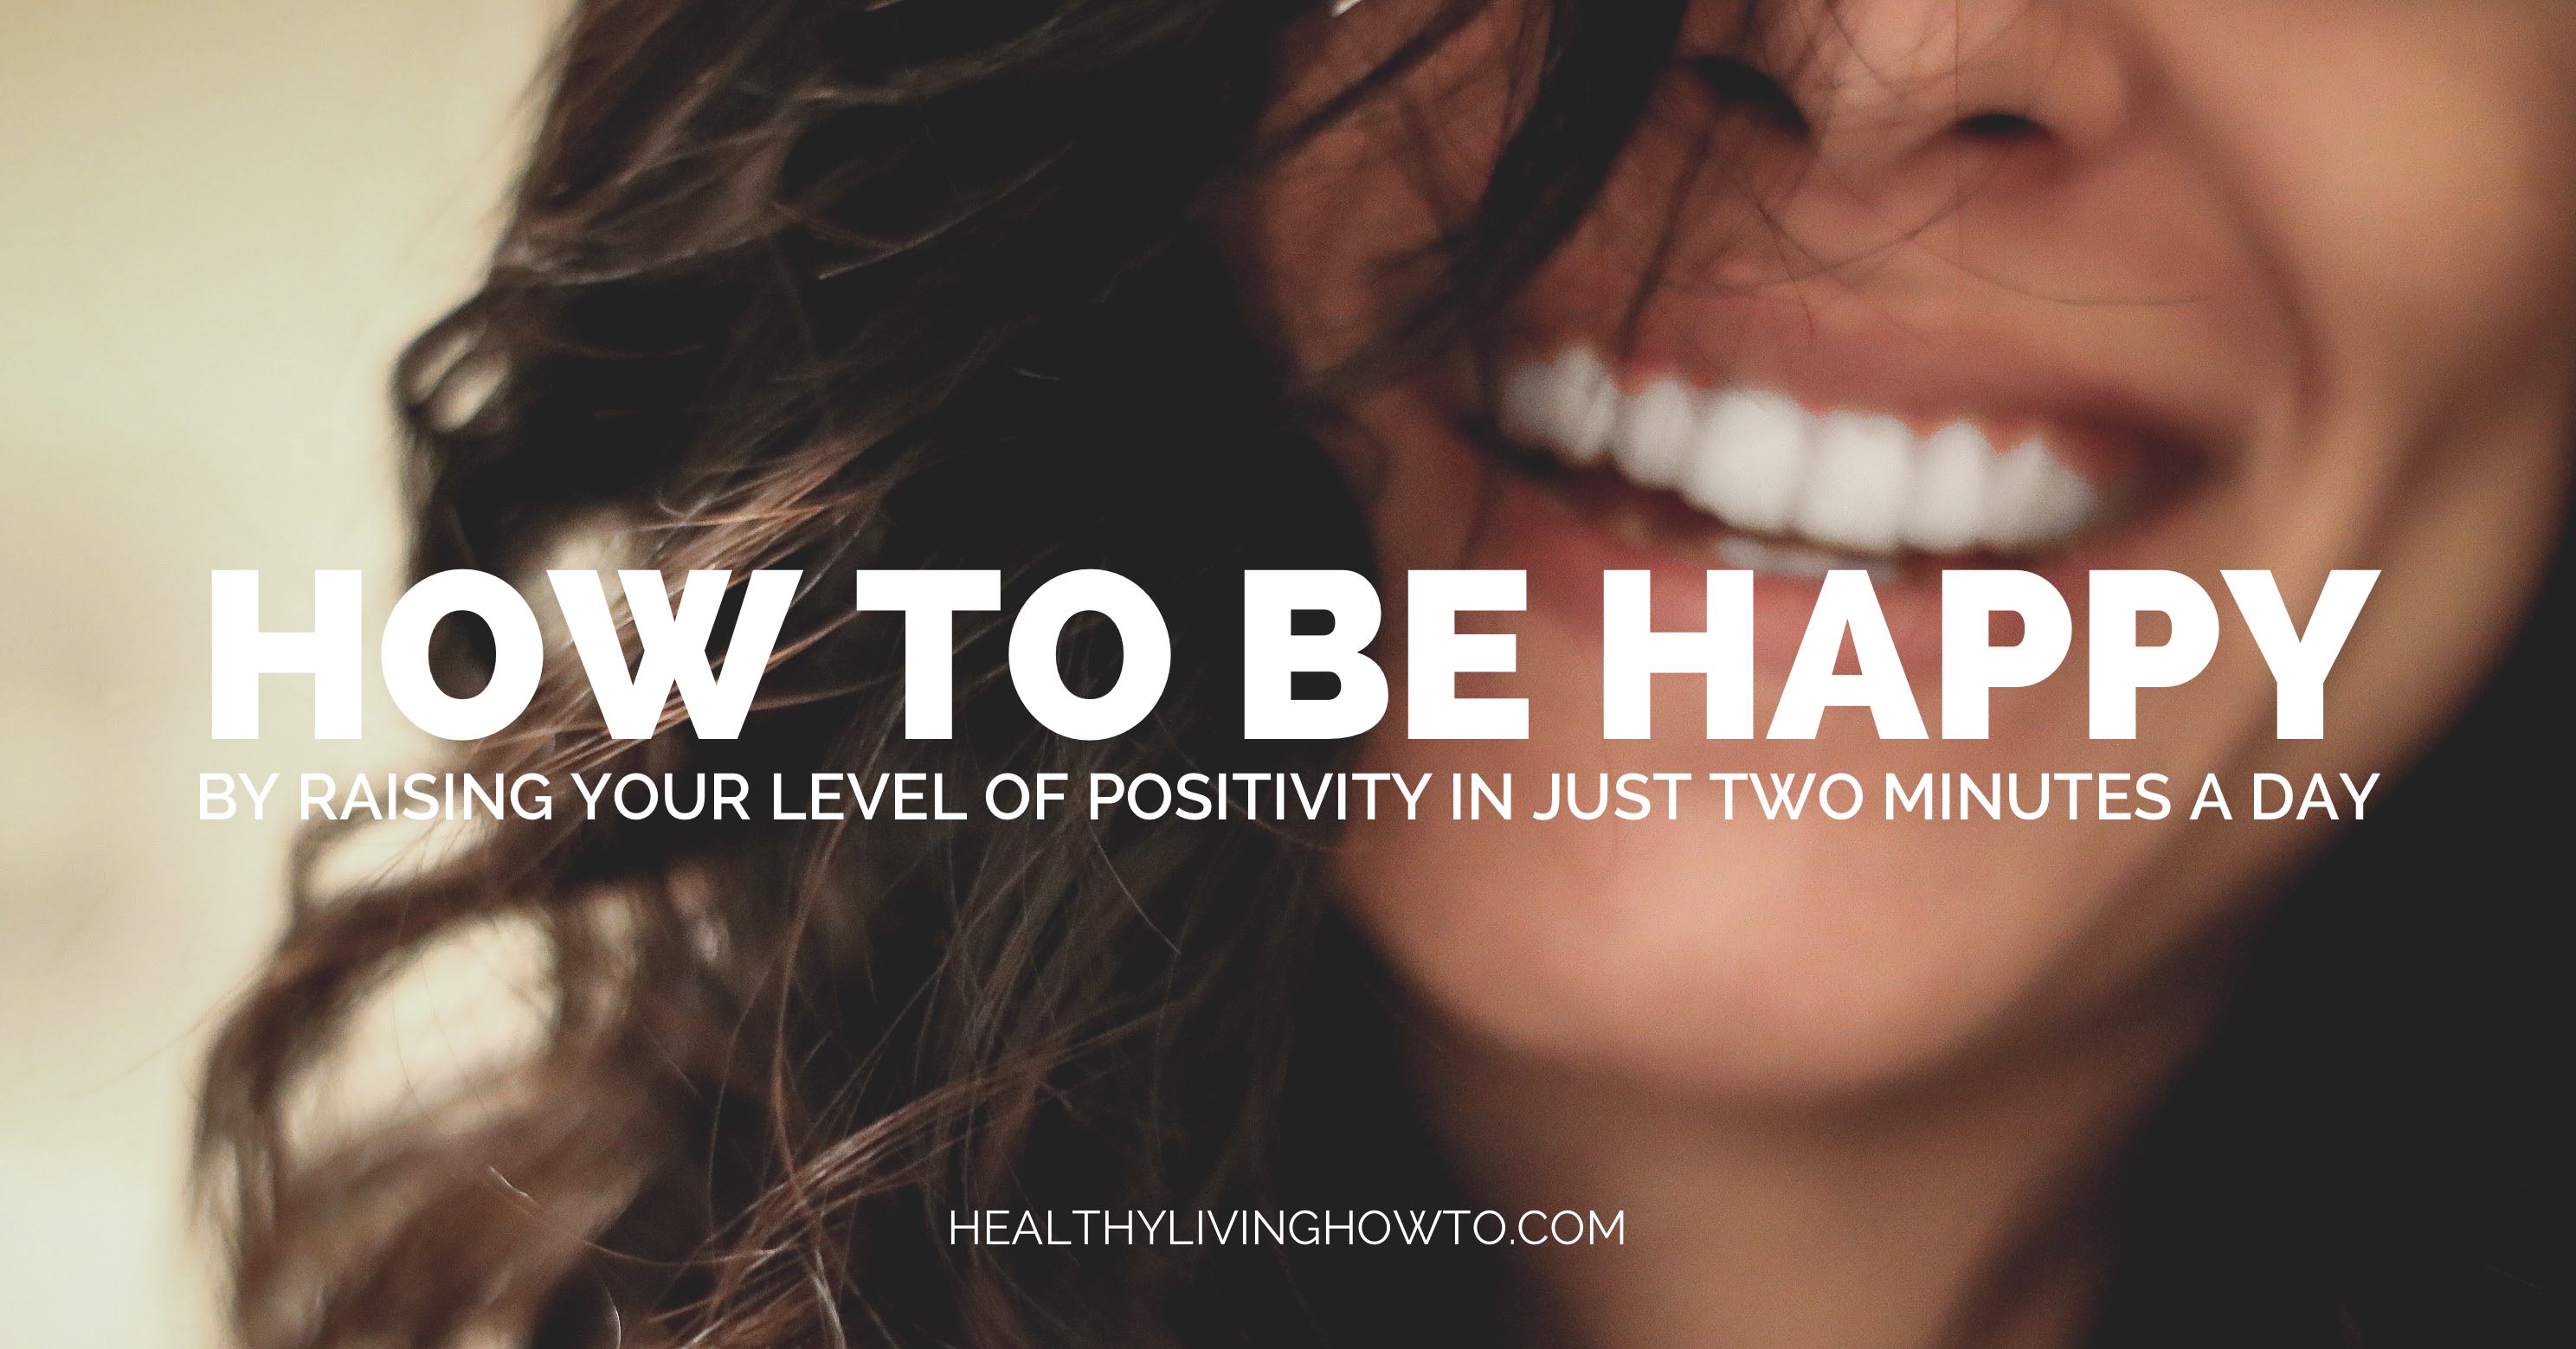 How To Be Happy | healthylivinghowto.com